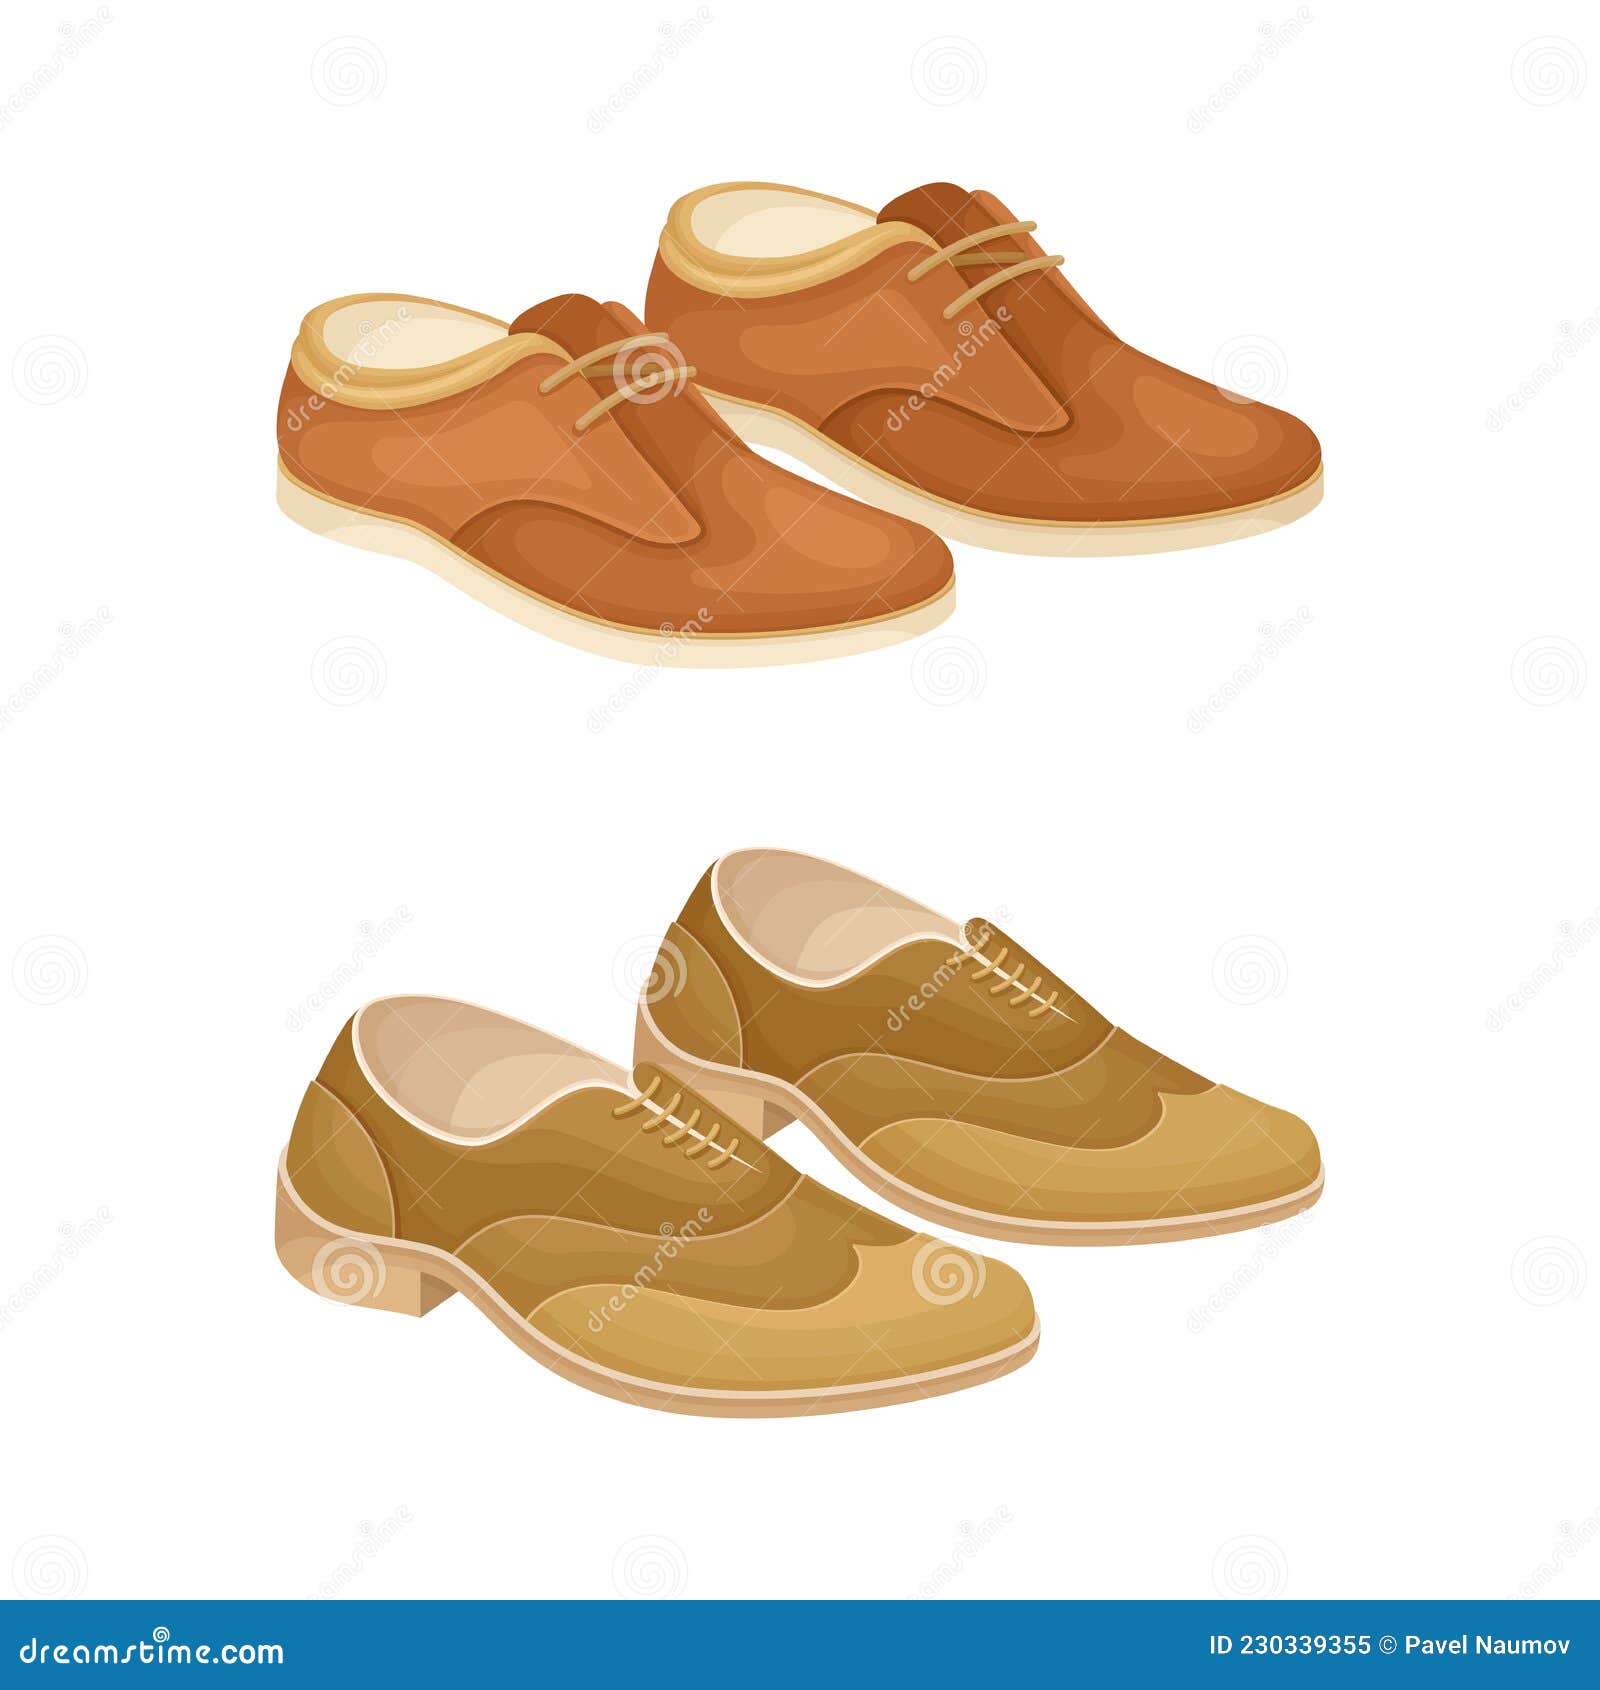 Fashionable Shoes Set. Brogues and Oxford Footwear Cartoon Vector ...